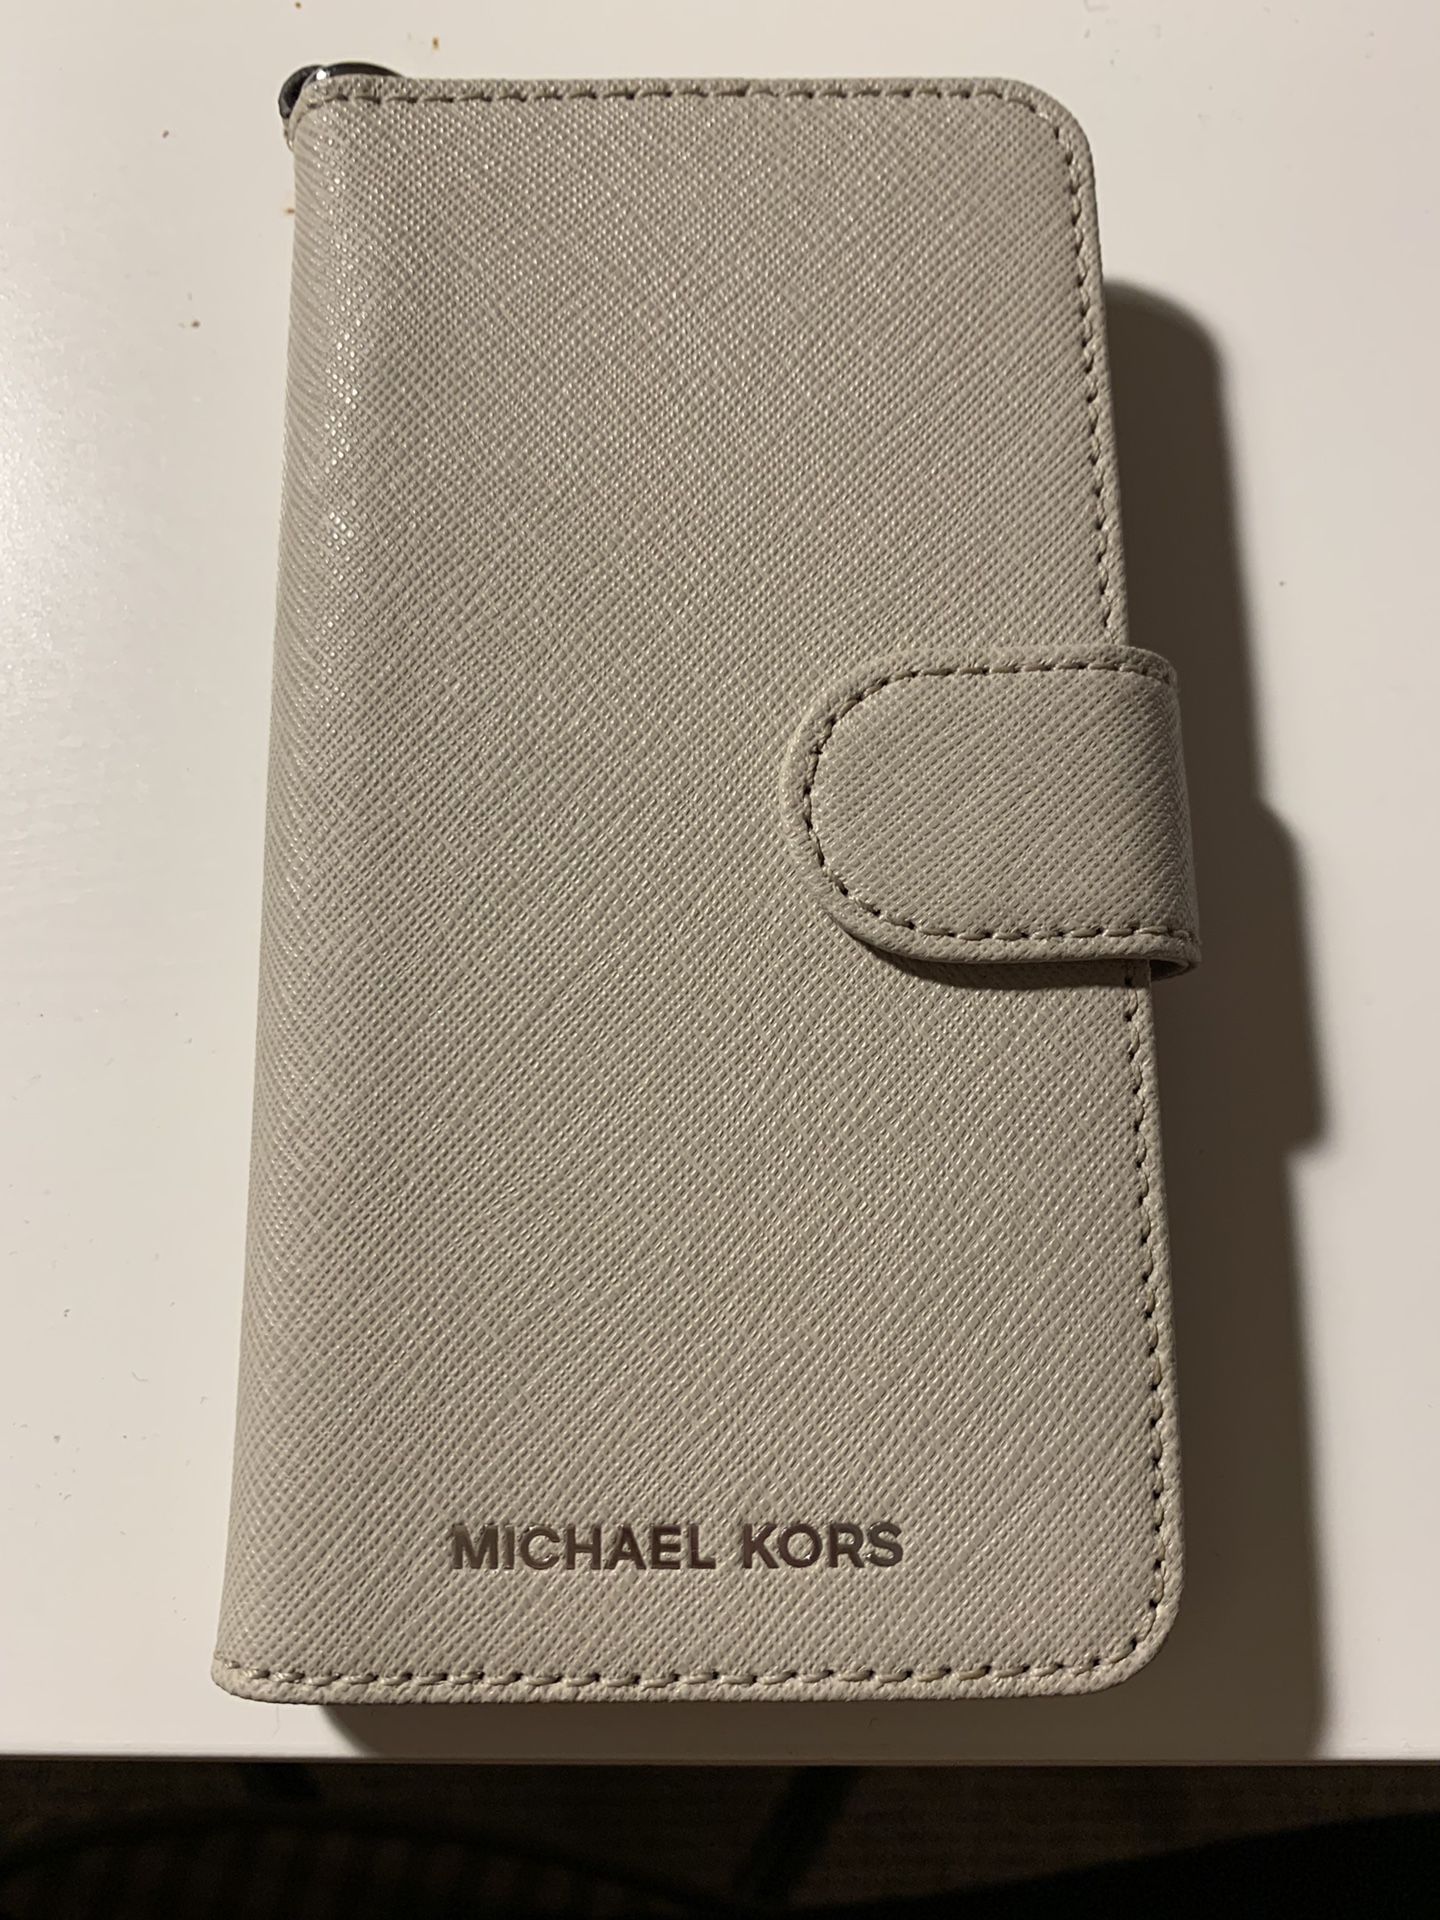 Michael Kors Iphone 6, 6s case for Sale in Boston, MA - OfferUp